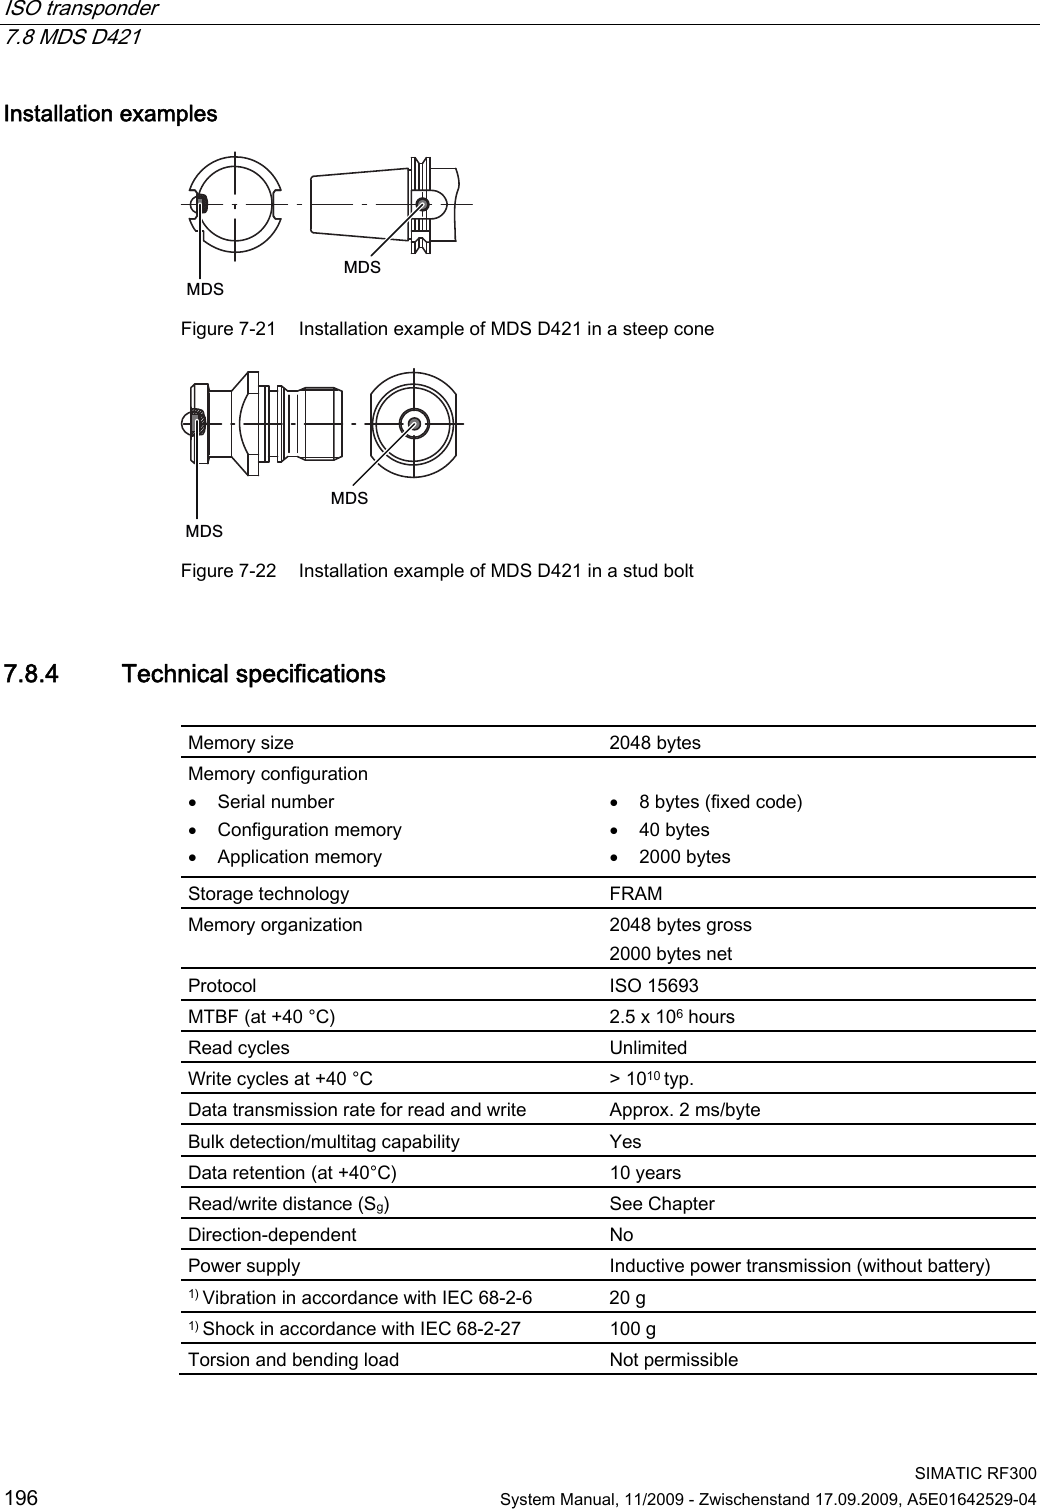 ISO transponder   7.8 MDS D421  SIMATIC RF300 196  System Manual, 11/2009 - Zwischenstand 17.09.2009, A5E01642529-04 Installation examples 0&apos;60&apos;6 Figure 7-21  Installation example of MDS D421 in a steep cone 0&apos;60&apos;6 Figure 7-22  Installation example of MDS D421 in a stud bolt 7.8.4 Technical specifications  Memory size  2048 bytes  Memory configuration  Serial number  Configuration memory  Application memory   8 bytes (fixed code)  40 bytes  2000 bytes Storage technology  FRAM Memory organization  2048 bytes gross 2000 bytes net Protocol  ISO 15693 MTBF (at +40 °C)  2.5 x 106 hours Read cycles  Unlimited Write cycles at +40 °C  &gt; 1010 typ. Data transmission rate for read and write  Approx. 2 ms/byte Bulk detection/multitag capability  Yes Data retention (at +40°C)  10 years Read/write distance (Sg)  See Chapter  Direction-dependent  No Power supply  Inductive power transmission (without battery) 1) Vibration in accordance with IEC 68-2-6  20 g 1) Shock in accordance with IEC 68-2-27  100 g Torsion and bending load  Not permissible 